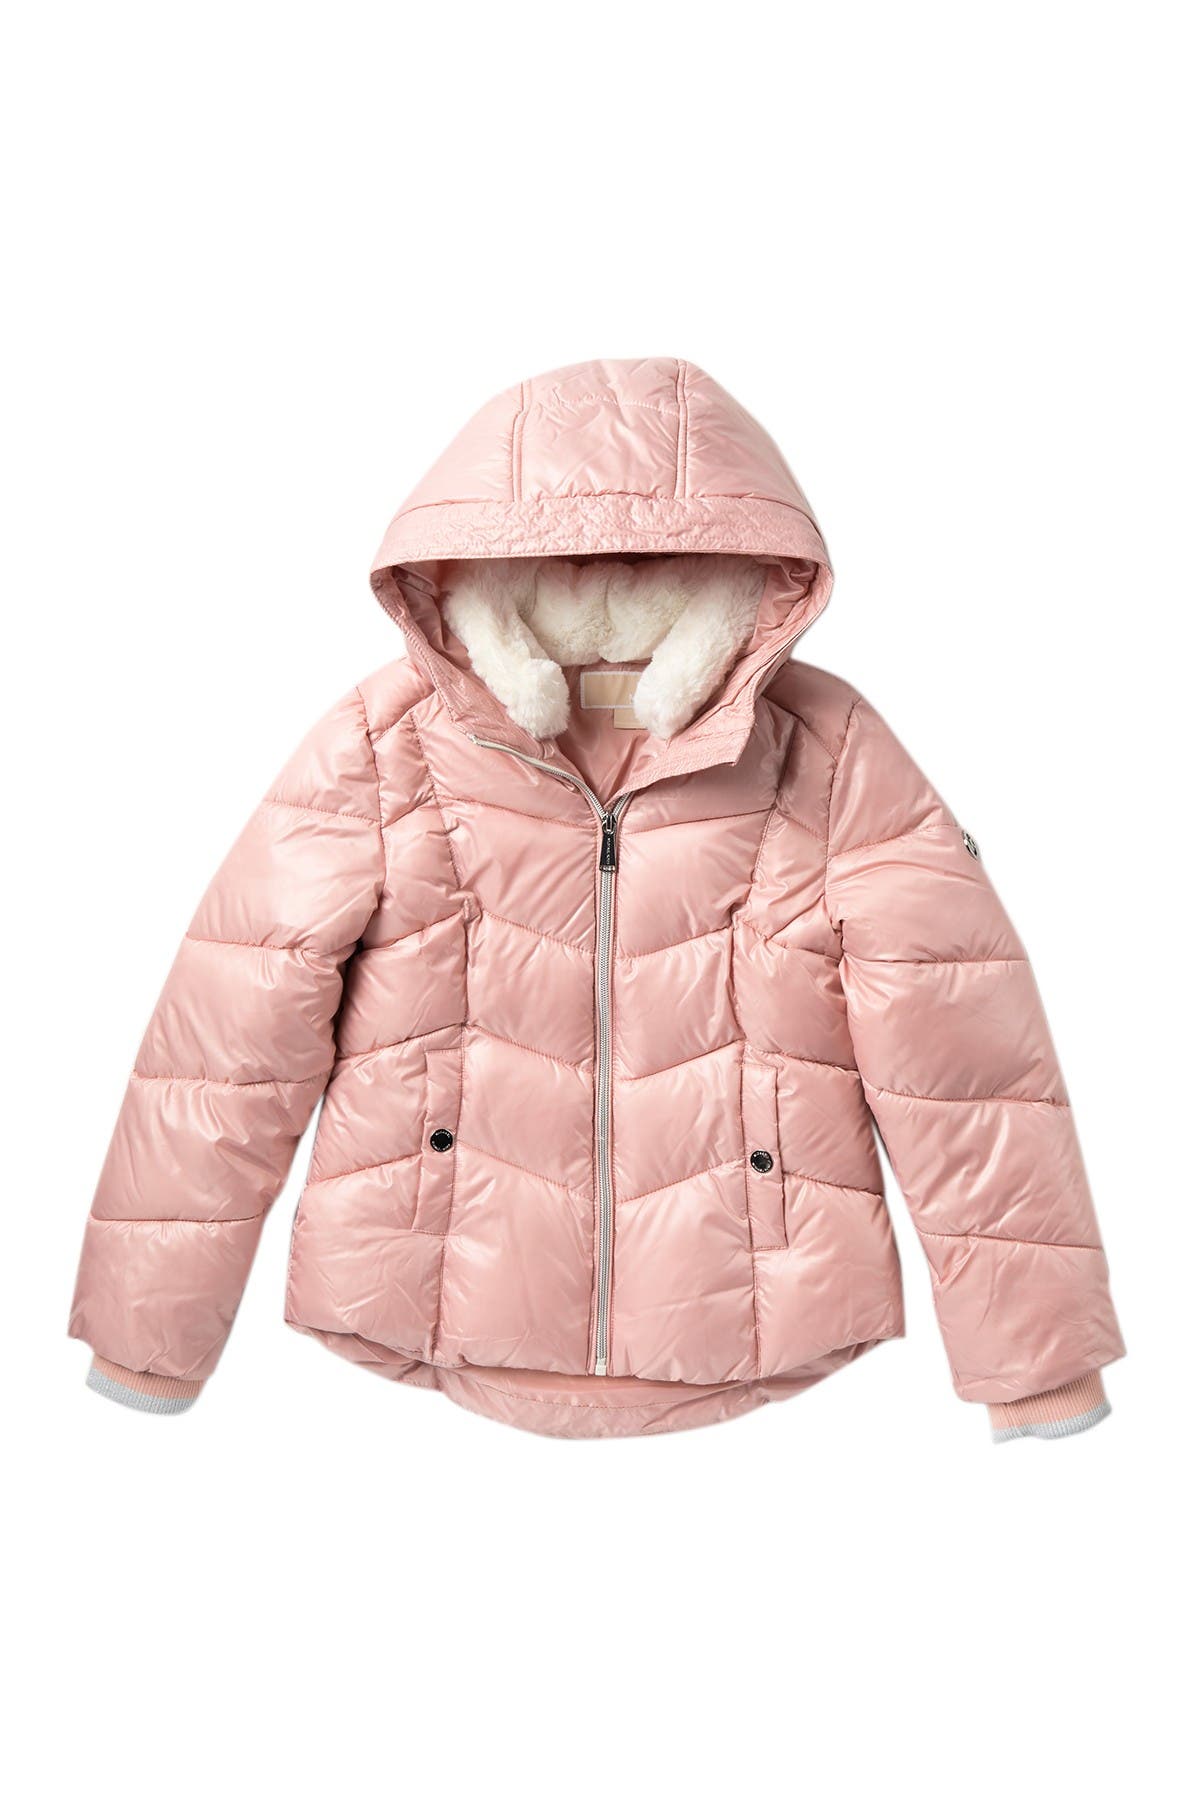 Michael Kors | Puffer Jacket with Faux 